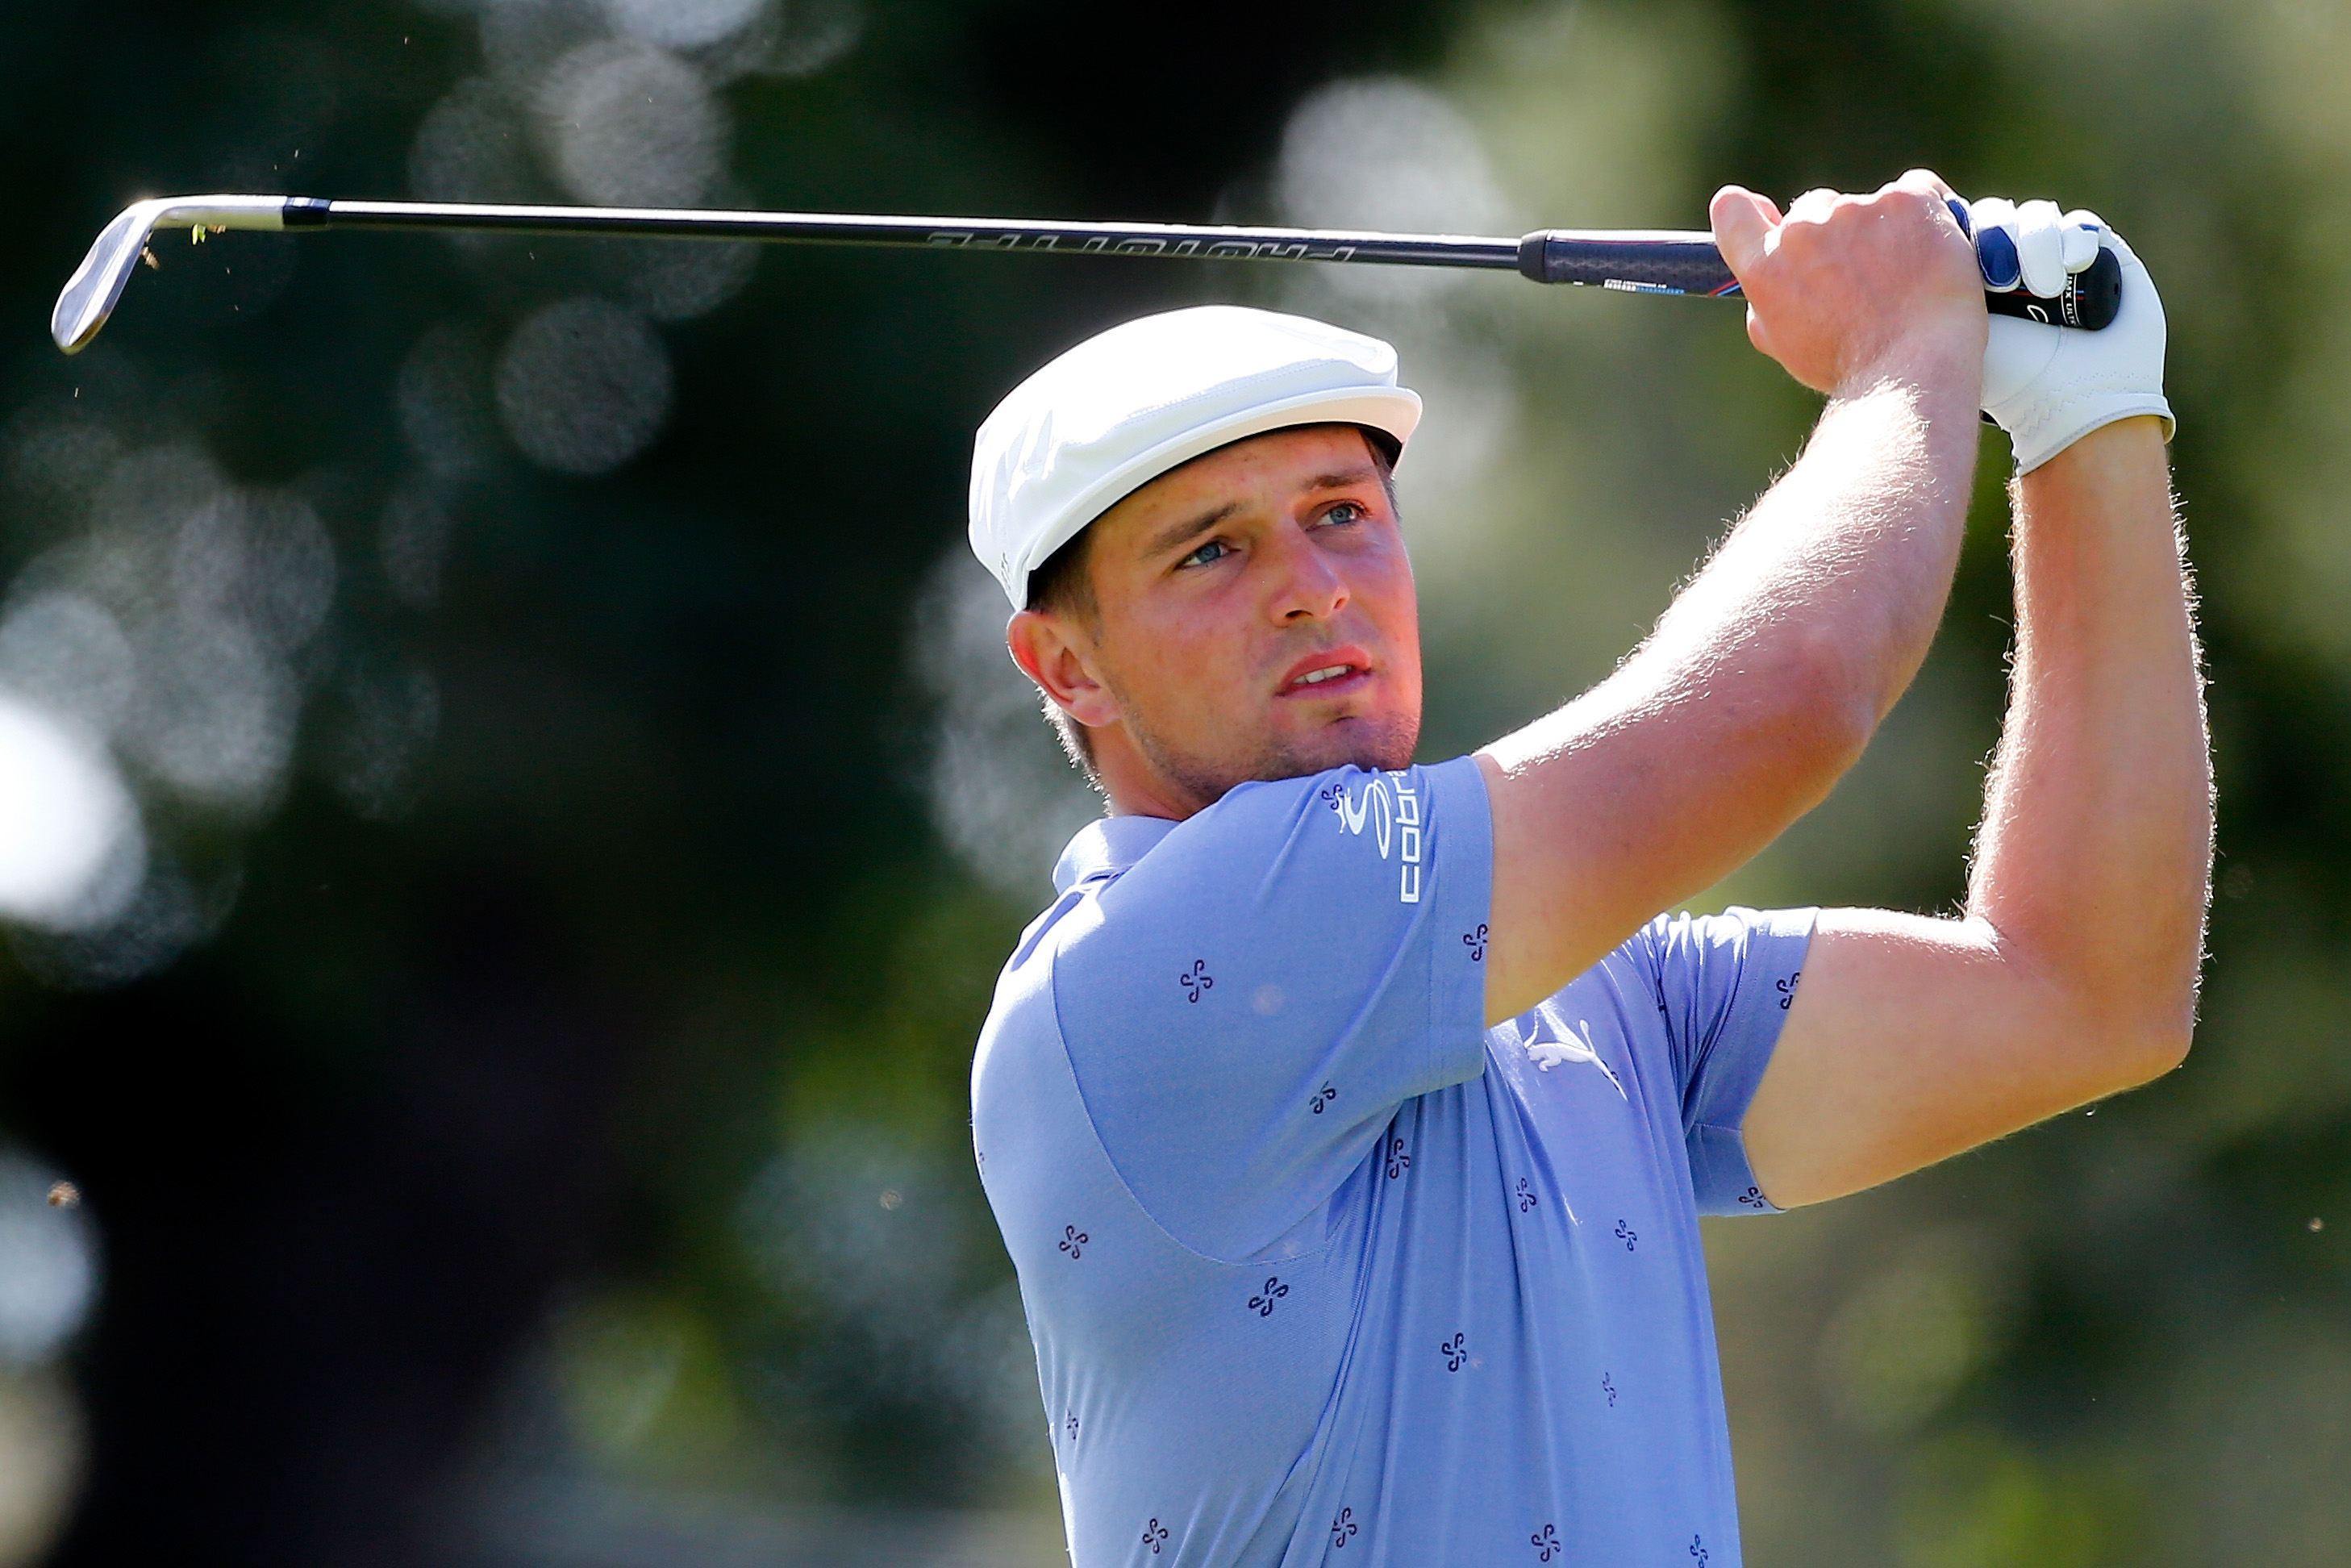 Bryson DeChambeau plans to bulk up in 2020: I'm going to look bigger